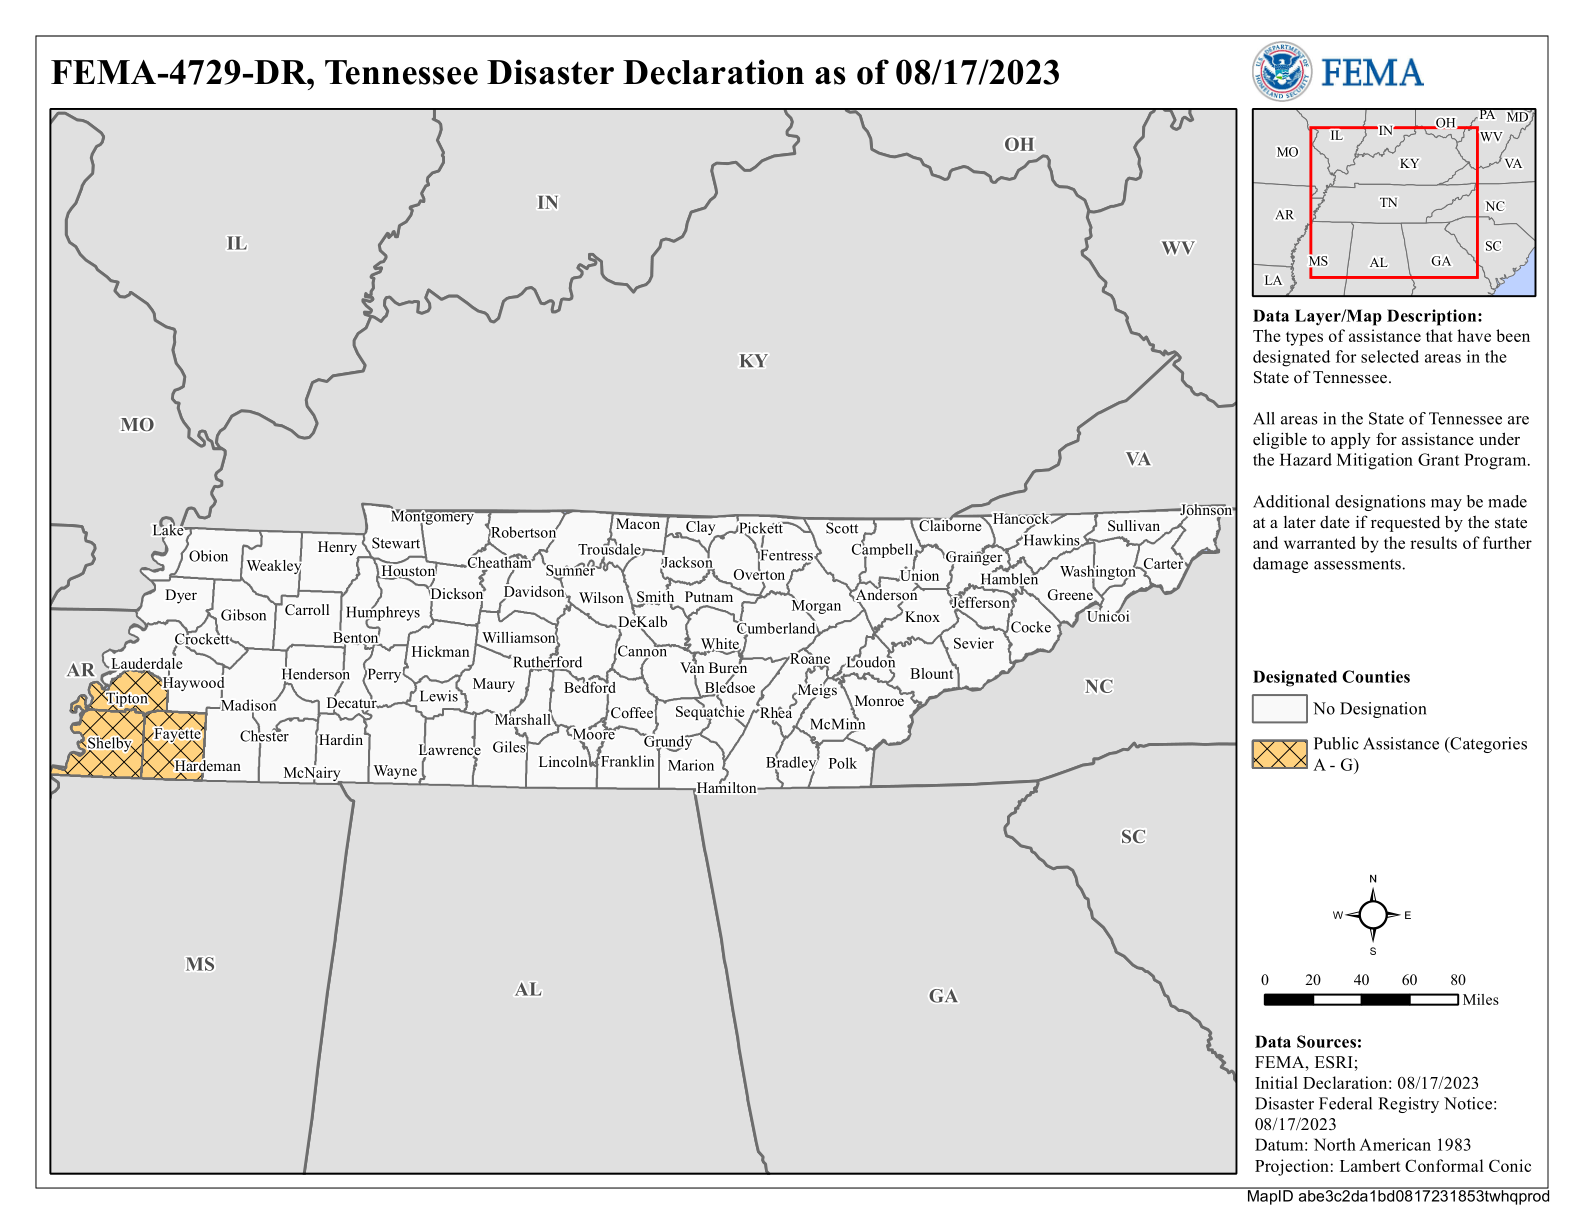 Map of Tennessee